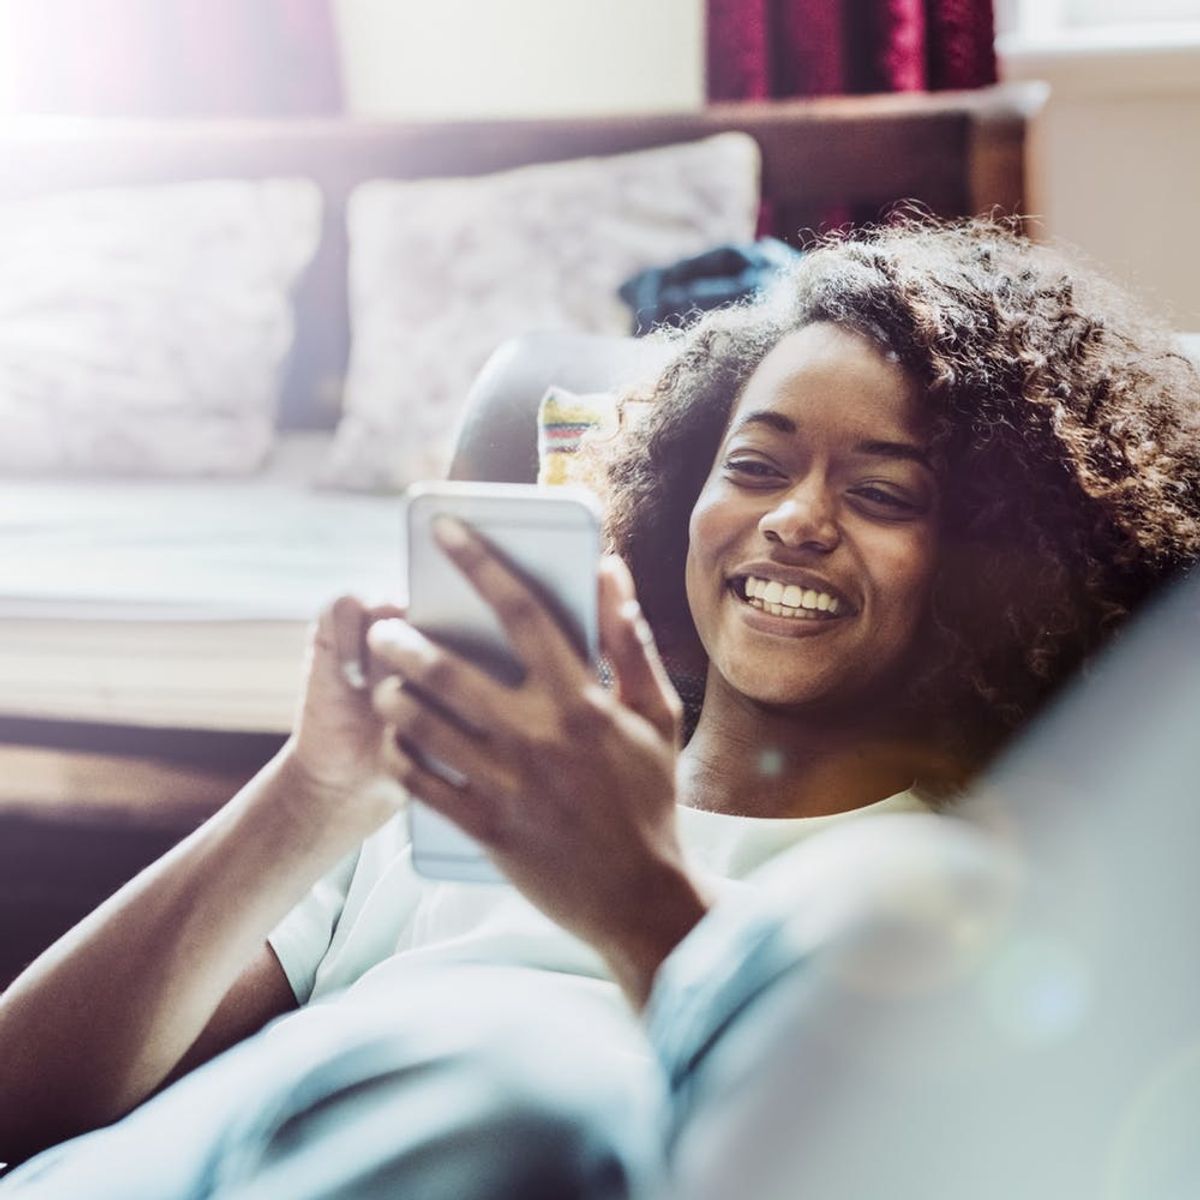 5 Real Women Share Their Favorite Dating App